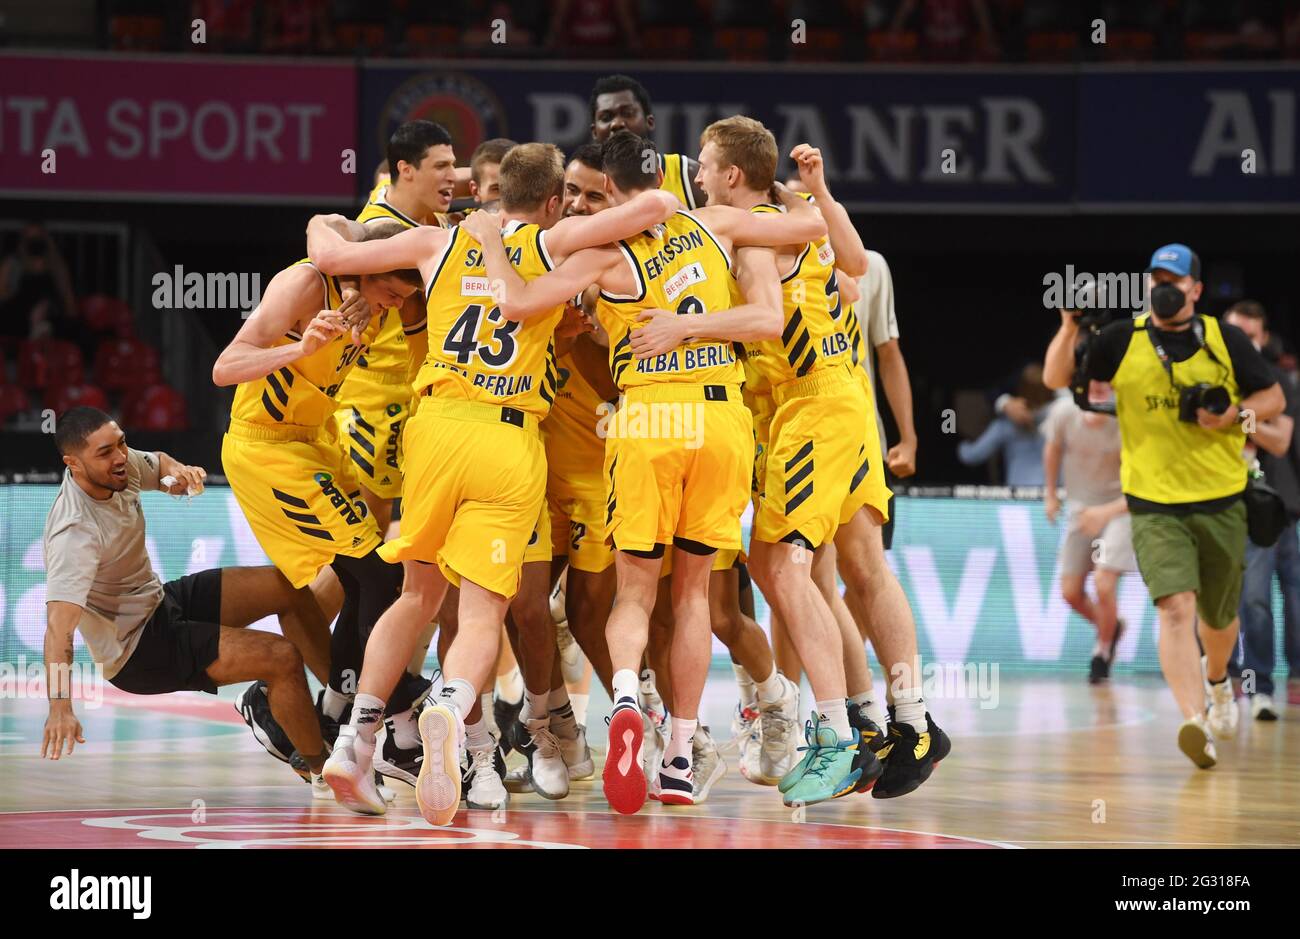 Munich, Germany. 13th June, 2021. Basketball: Bundesliga, FC Bayern Munich  - Alba Berlin, Championship Round, Final, Matchday 4 at the Audi Dome. The  team from Berlin hugs each other after the final